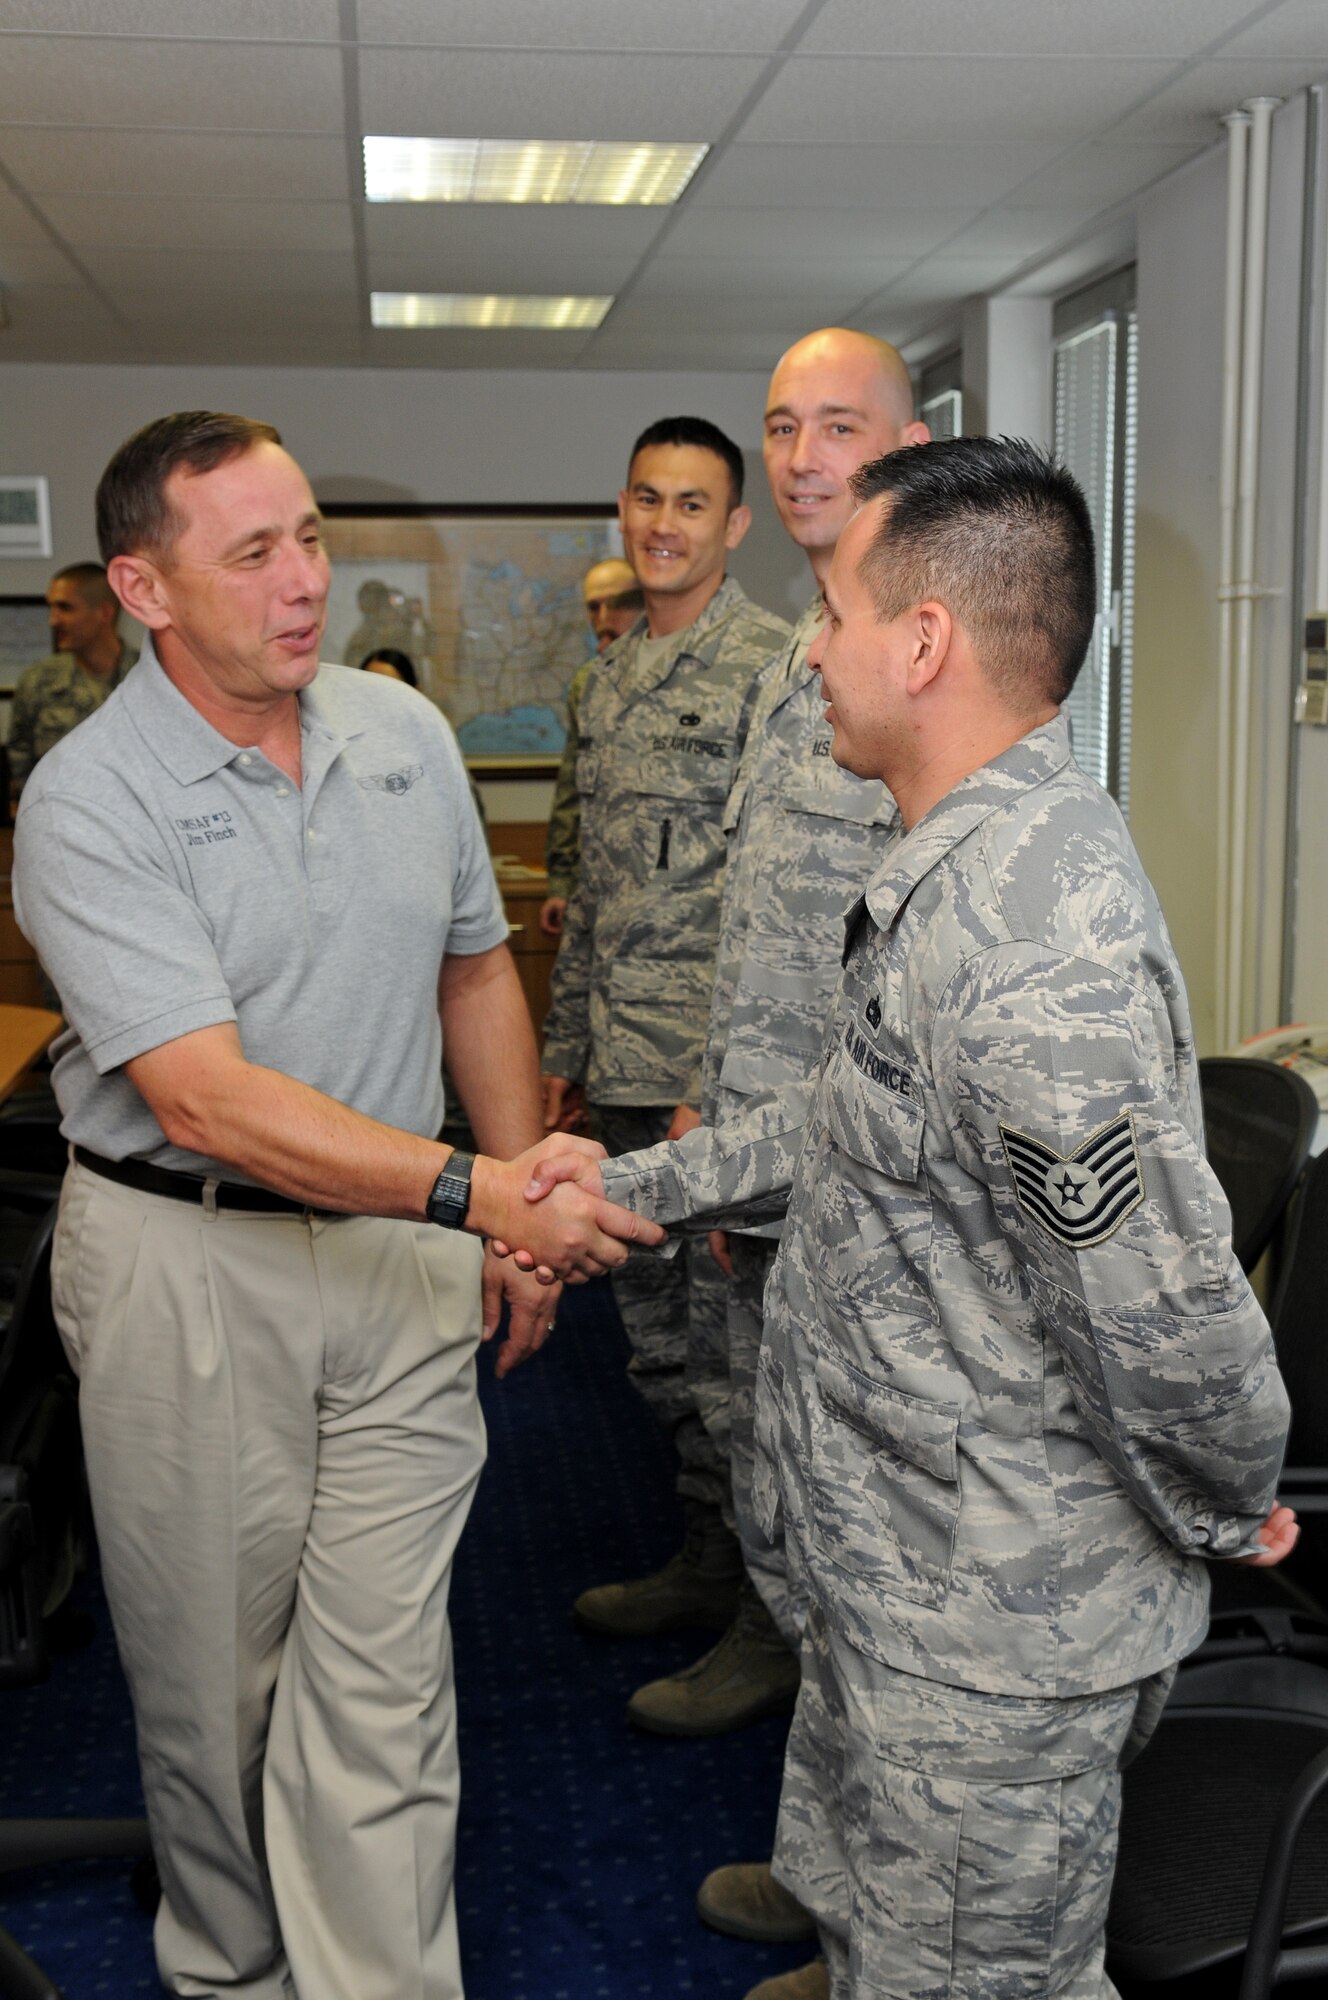 Frederick J. Finch, 13th Chief Master Sergeant of the Air Force, greets Tech. Sgt. Jose Gonzalez, Kisling Noncommissioned Officer Academy instructor, at the academy on Kapaun Air Station, Germany, May 22, 2009. (U.S. Air Force photo by Airman 1st Class Grovert Fuentes-Contreras) (Released)